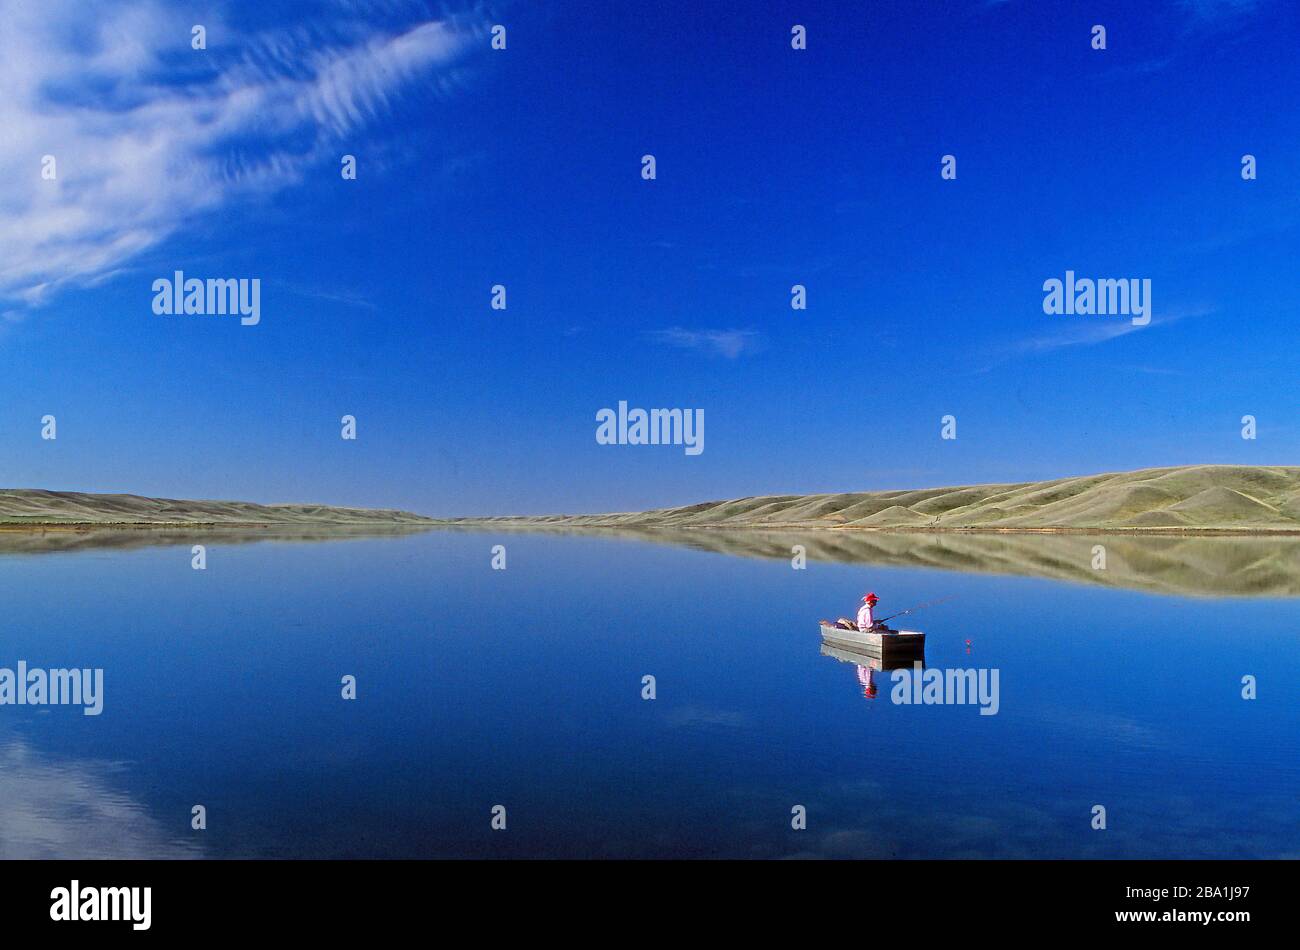 A man fishing in a boat  on the tranquil water of McGregor Lake, Alberta Canada Stock Photo